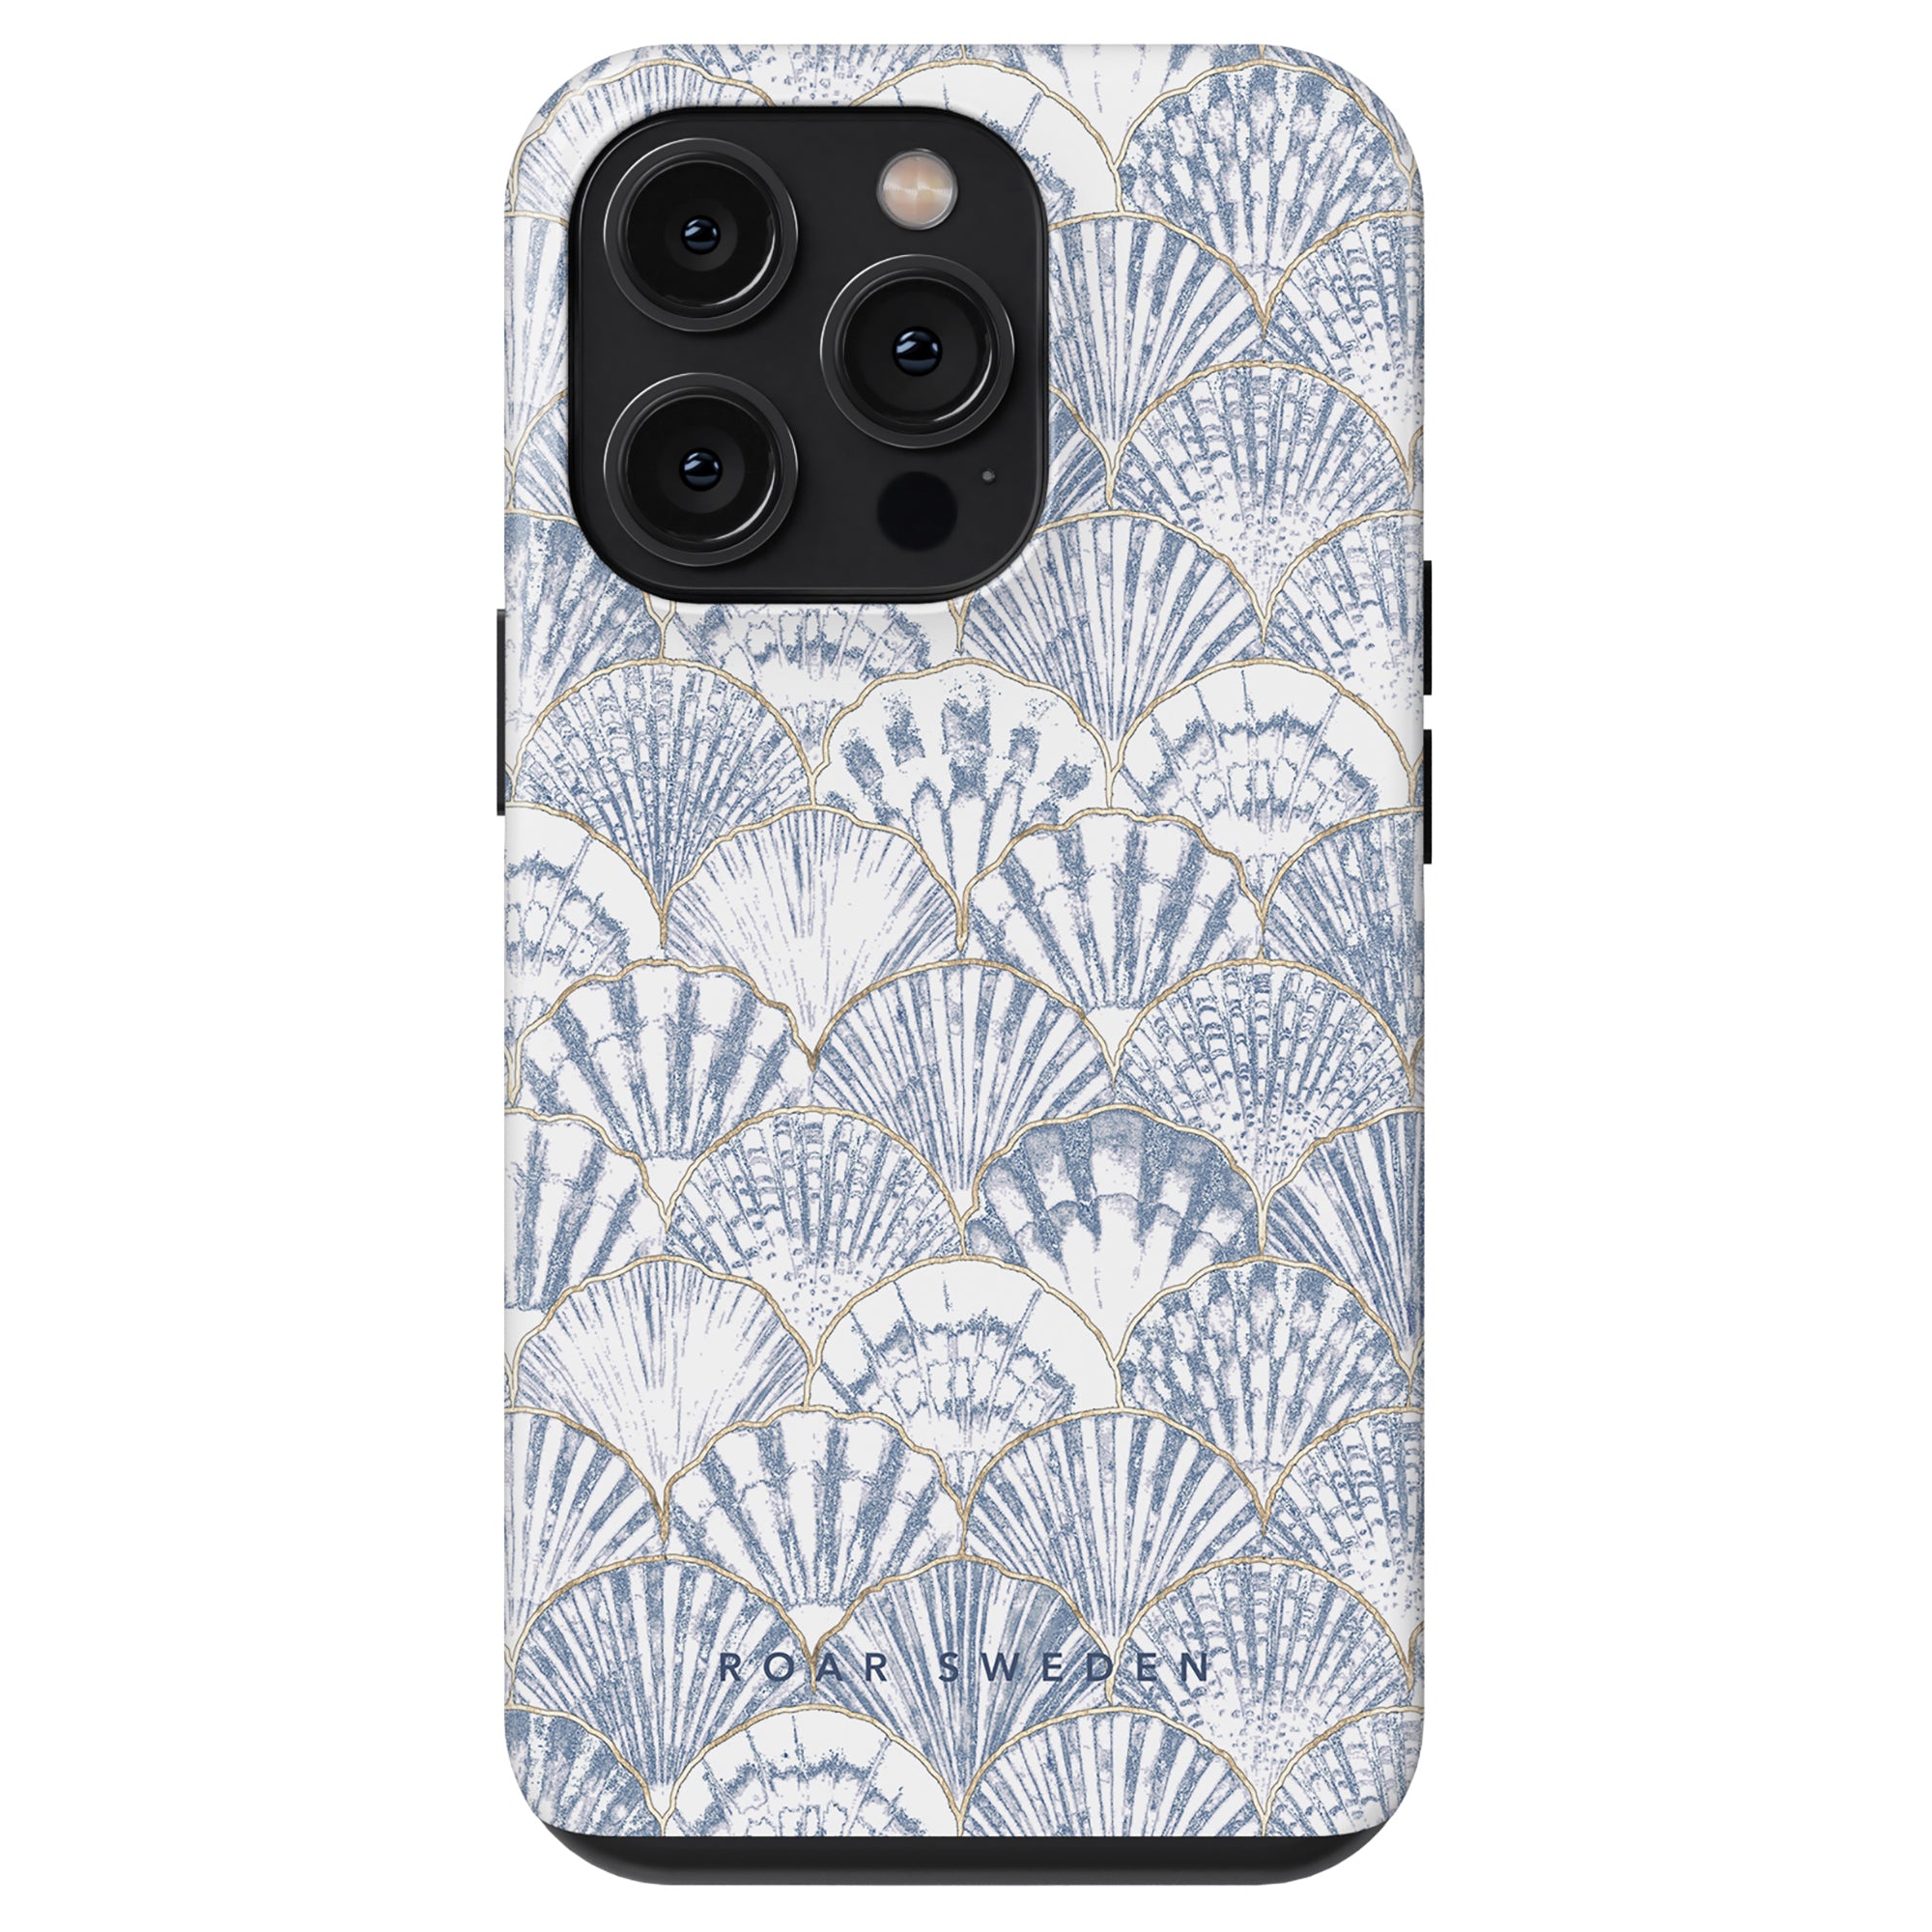 Dual-camera smartphone with a Valencia - Tough Case from the Ocean Collection.